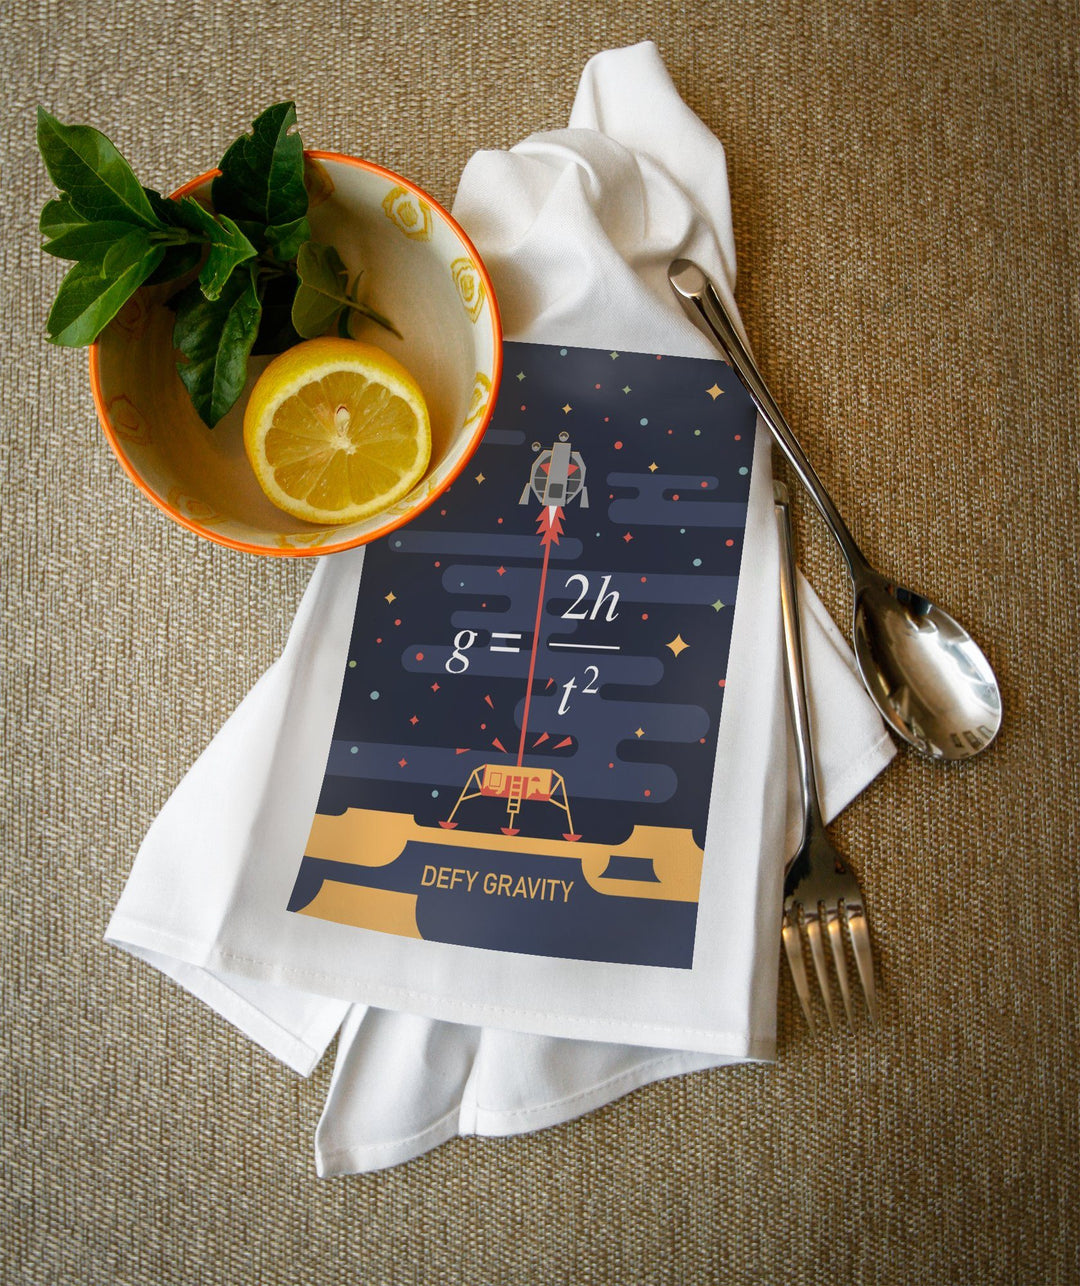 Equations and Emojis Collection, Lunar Lander, Defy Gravity, Towels and Aprons Kitchen Lantern Press 